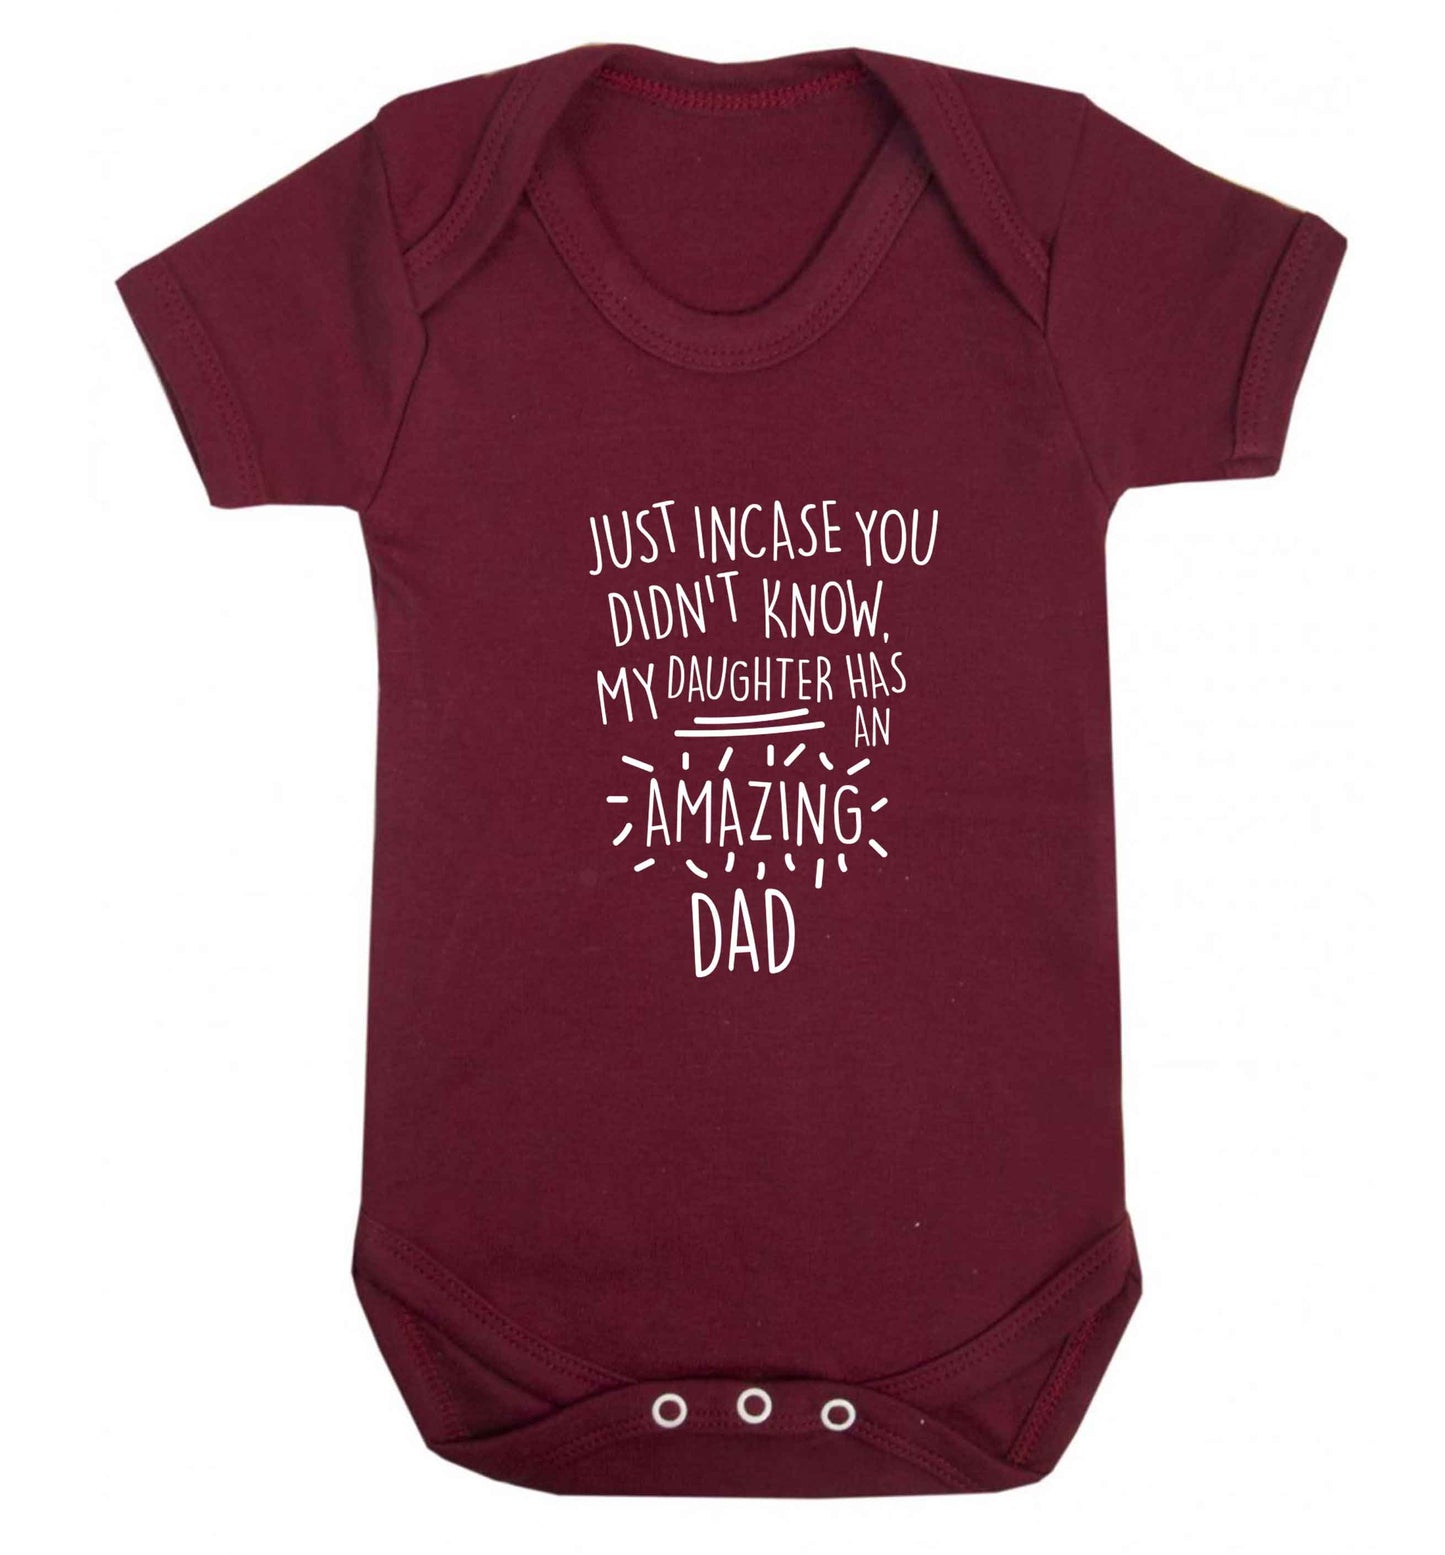 Just incase you didn't know my daughter has an amazing dad baby vest maroon 18-24 months